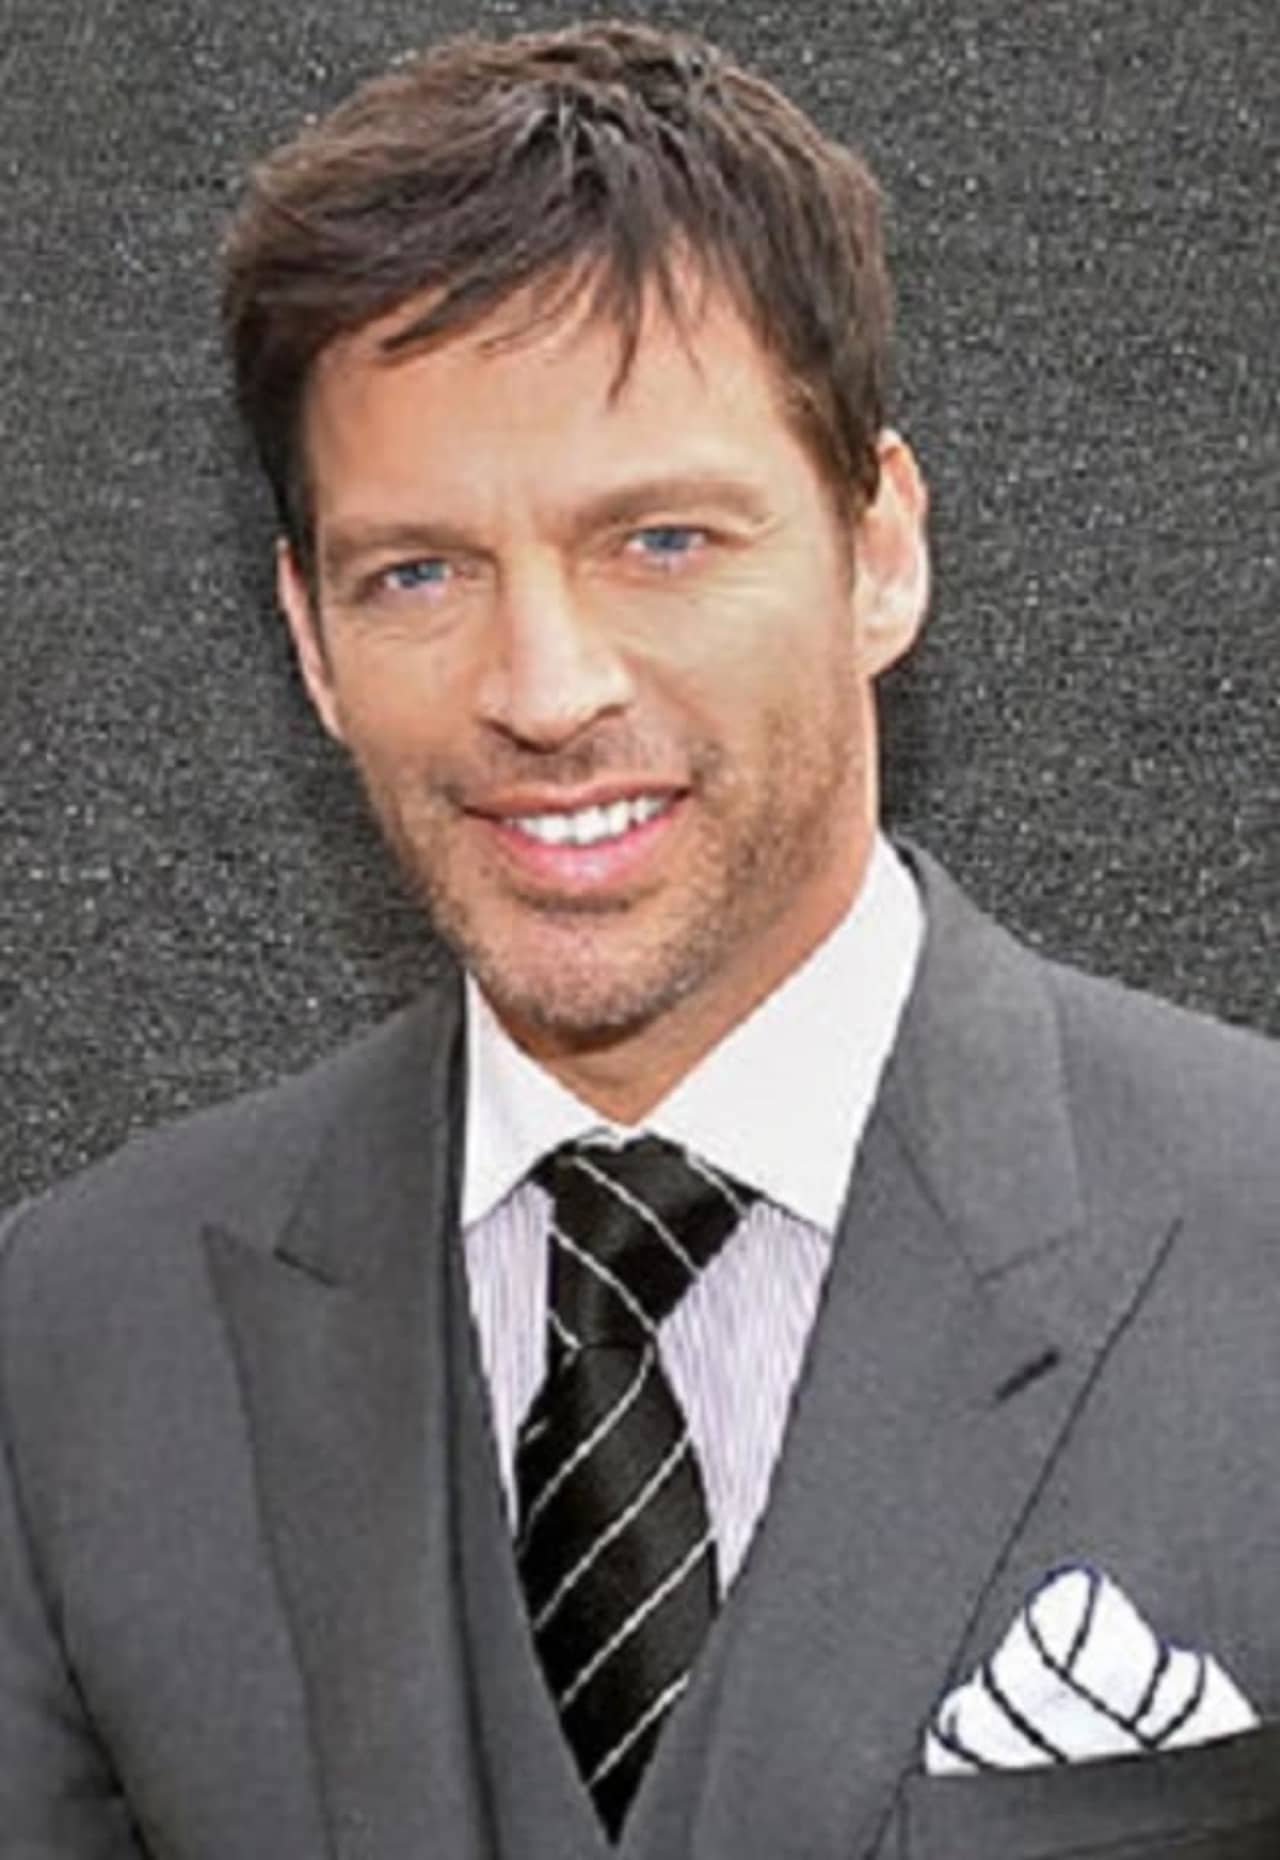 New Canaan's own Harry Connick, Jr., a singer, composer and actor, is launching his own television talk-variety show in September.